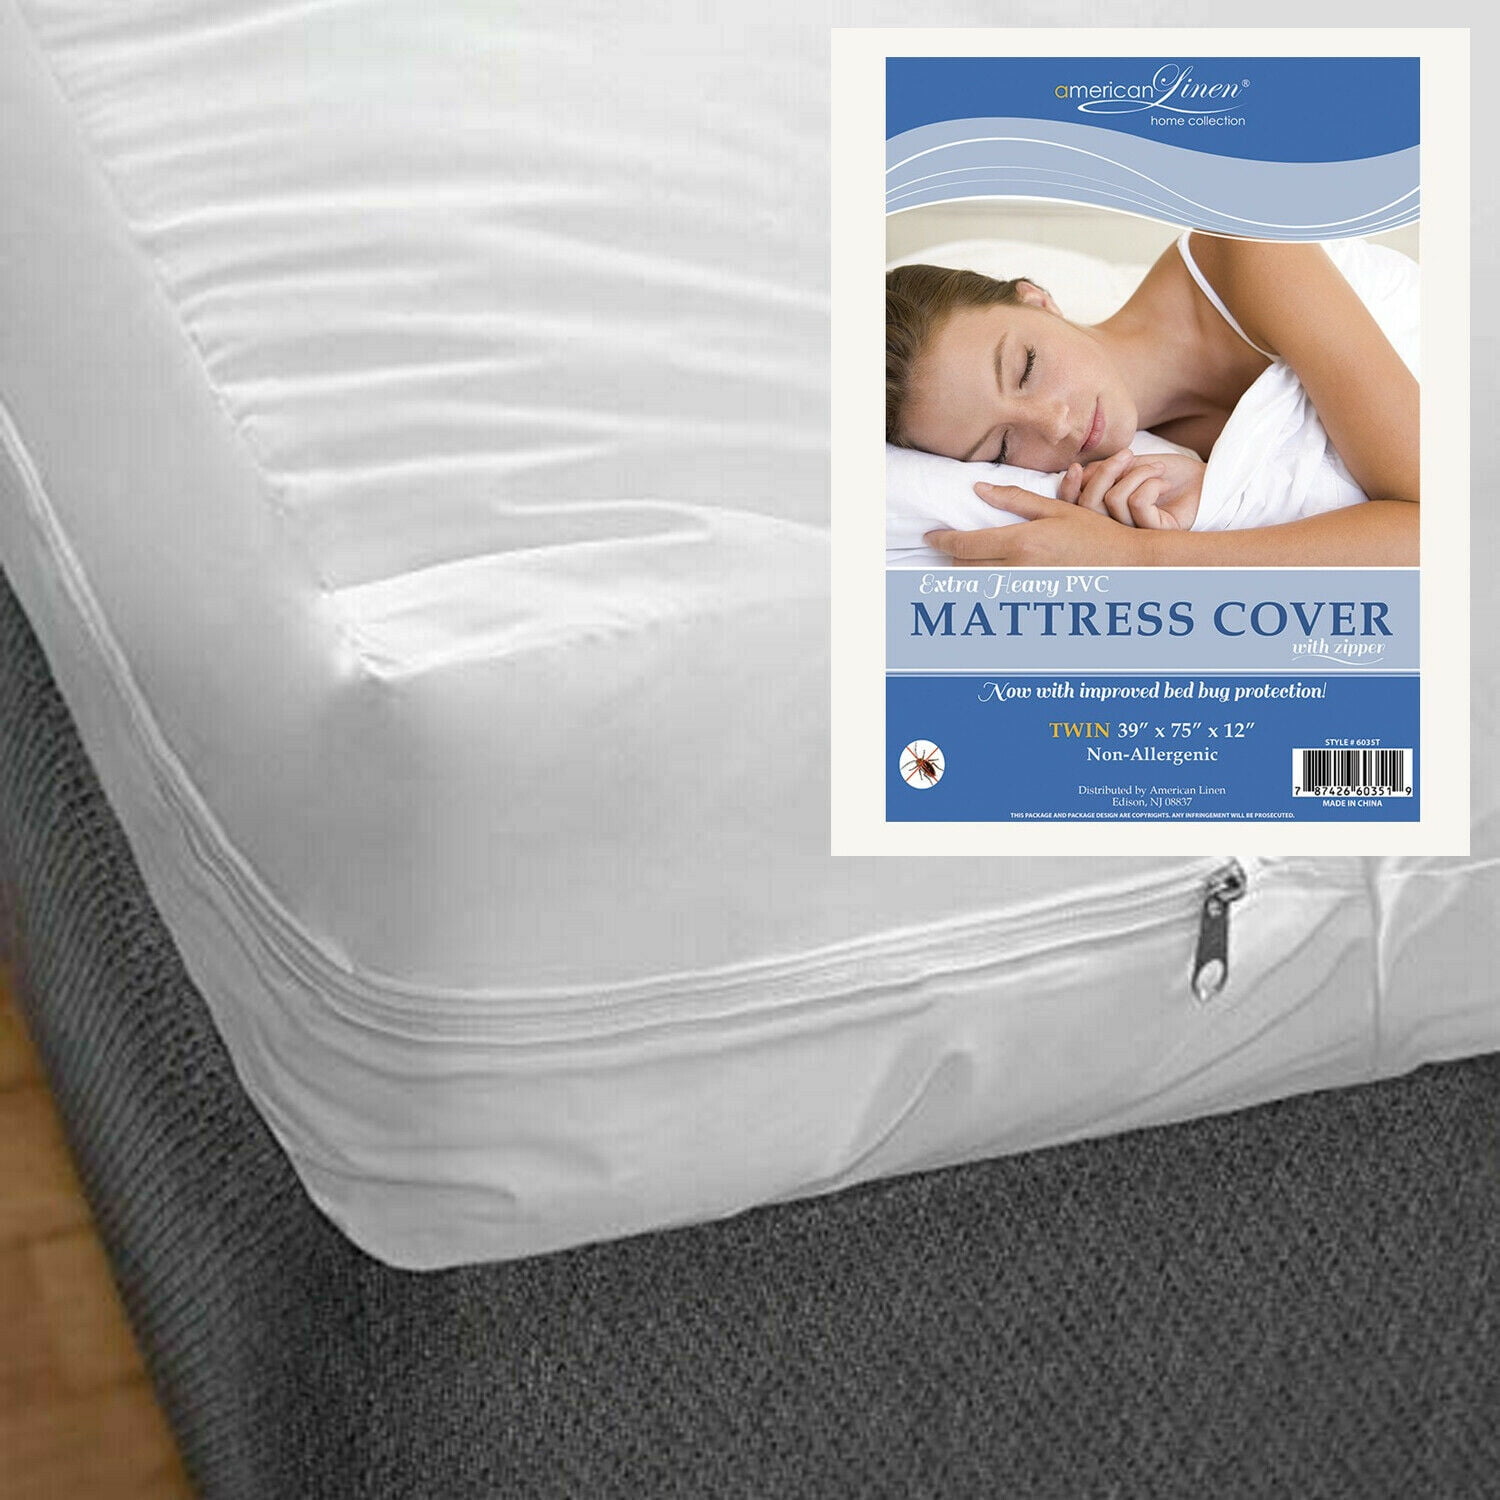 Allergenic Bed Bug Protector King, Bed Bug Mattress Cover King Size